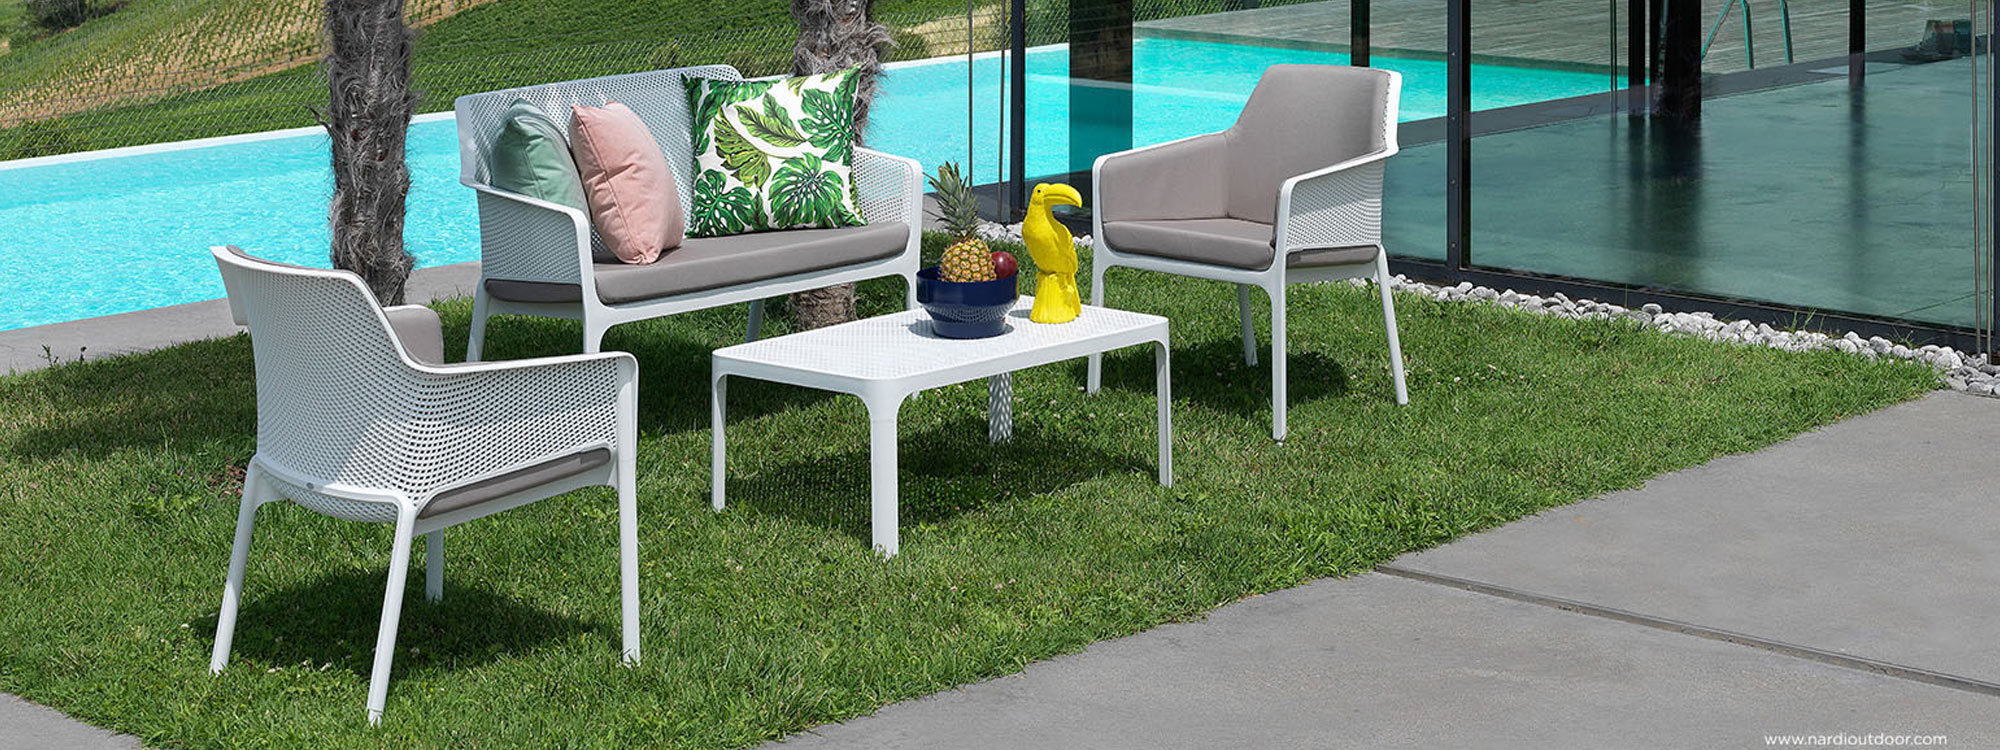 Net Bench STACKING OUTDOOR SOFA Is A MODERN Garden Sofa In HIGH QUALITY HOTEL FURNITURE By NARDI EXTERIOR Hospitality FURNITURE Italy